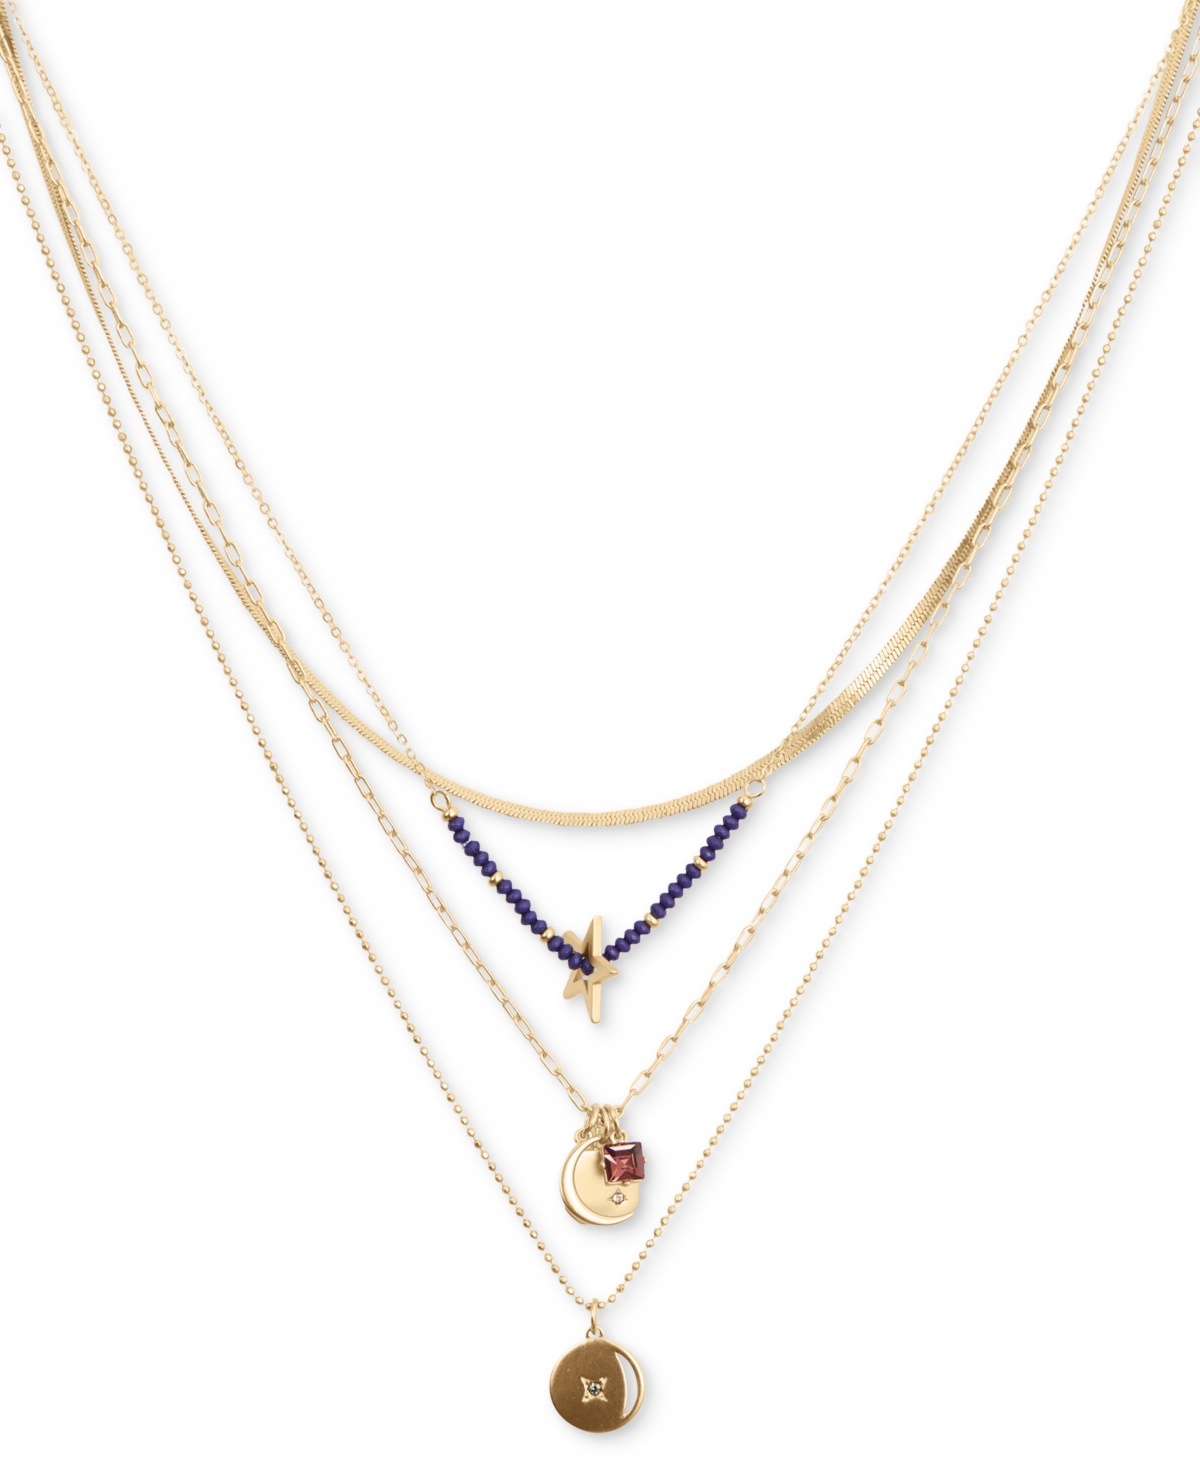 Lucky Brand Gold-tone Crystal Celestial Charm Convertible Layered Pendant Necklace, 15-3/4" + 2" Extender